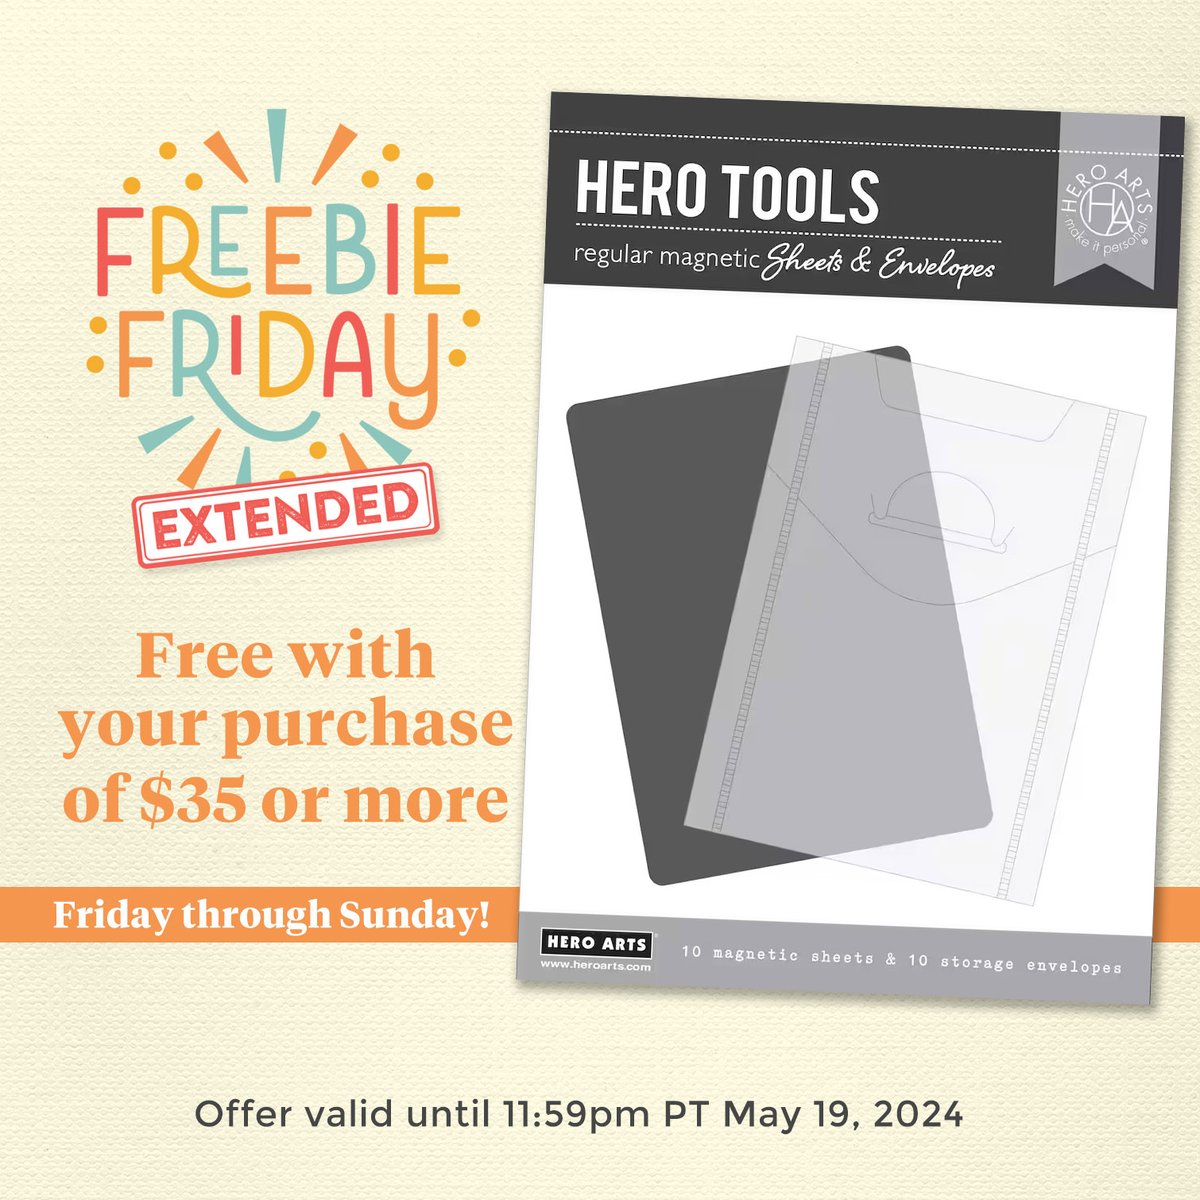 Free storage, anyone? Now through Sunday, we're giving you a FREE 10-pack of Hero Tools Magnet Sheets & Storage Envelopes! ($21.99 value) Learn more: heroarts.com/blogs/hero-art…